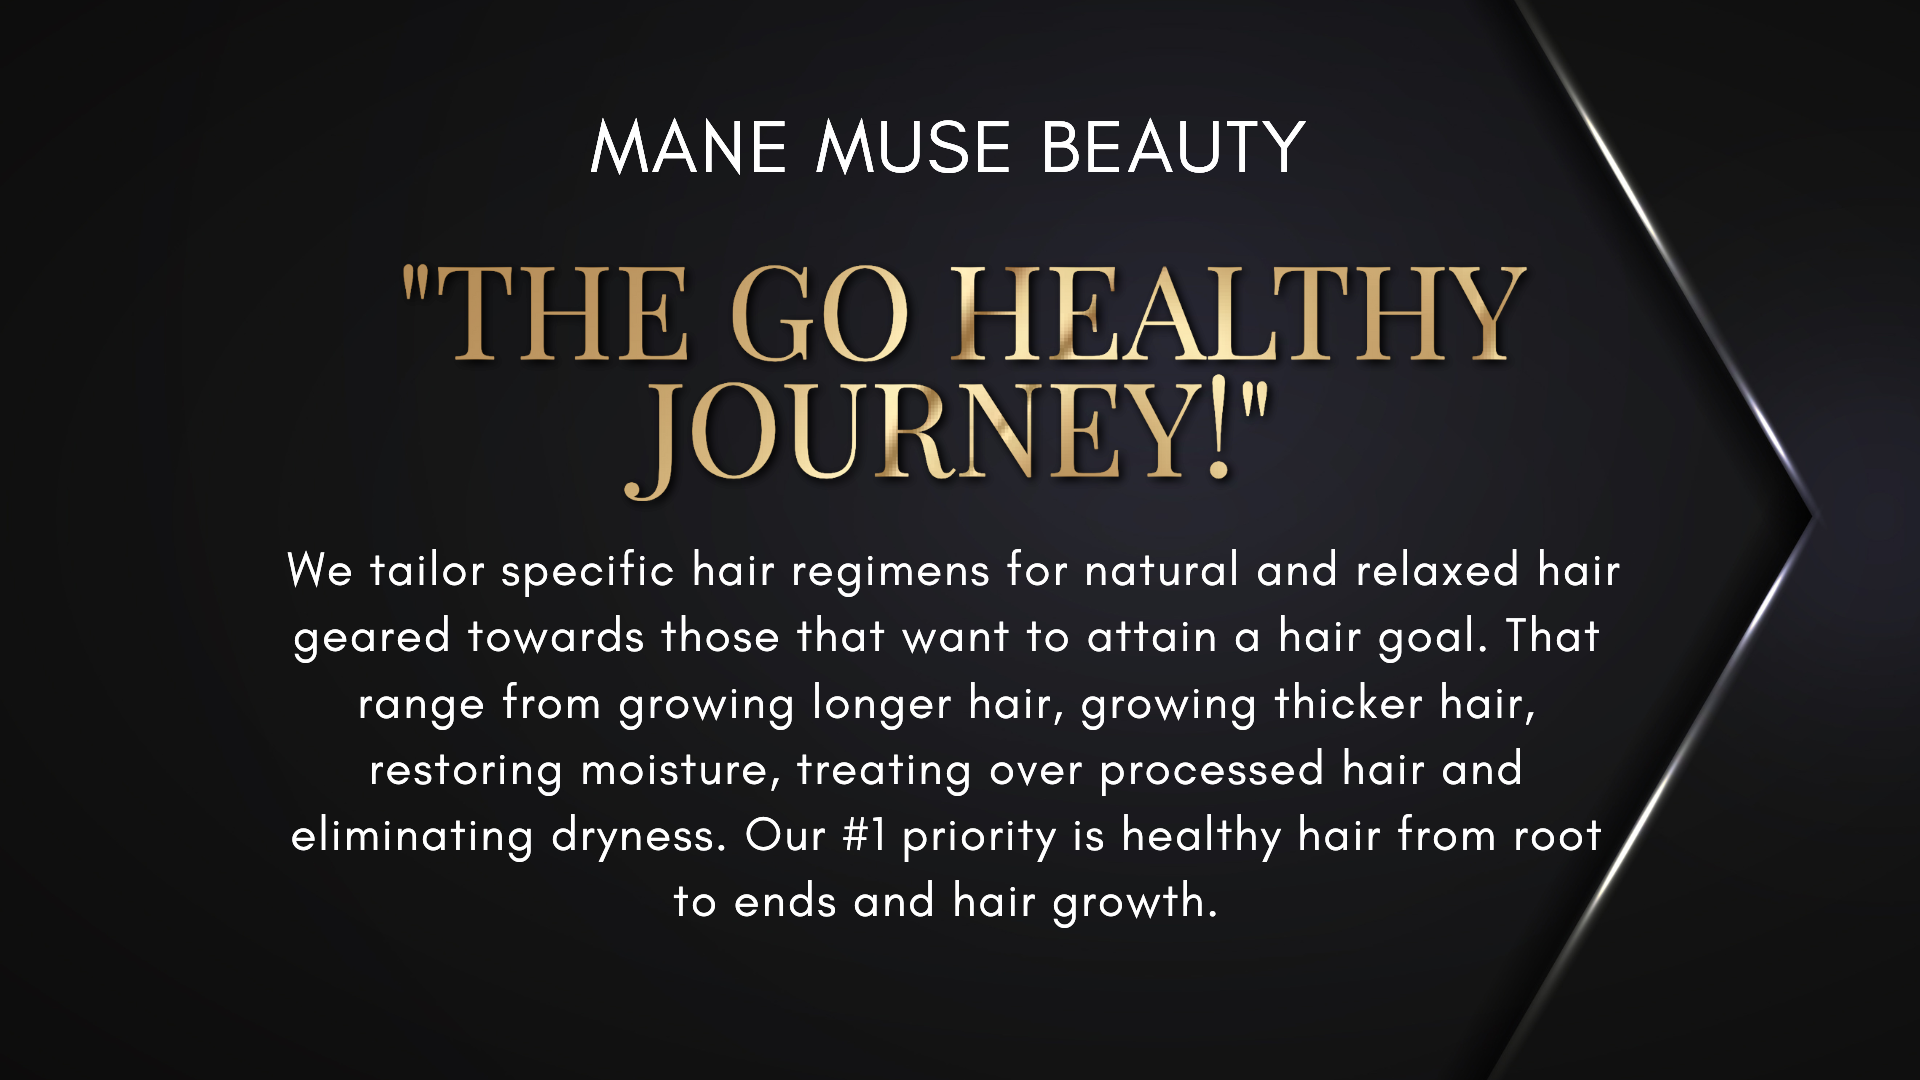 Mane Muse Branding  (1080 × 1920 px) (18 × 20 in) (1920 × 1080 px) (11).png